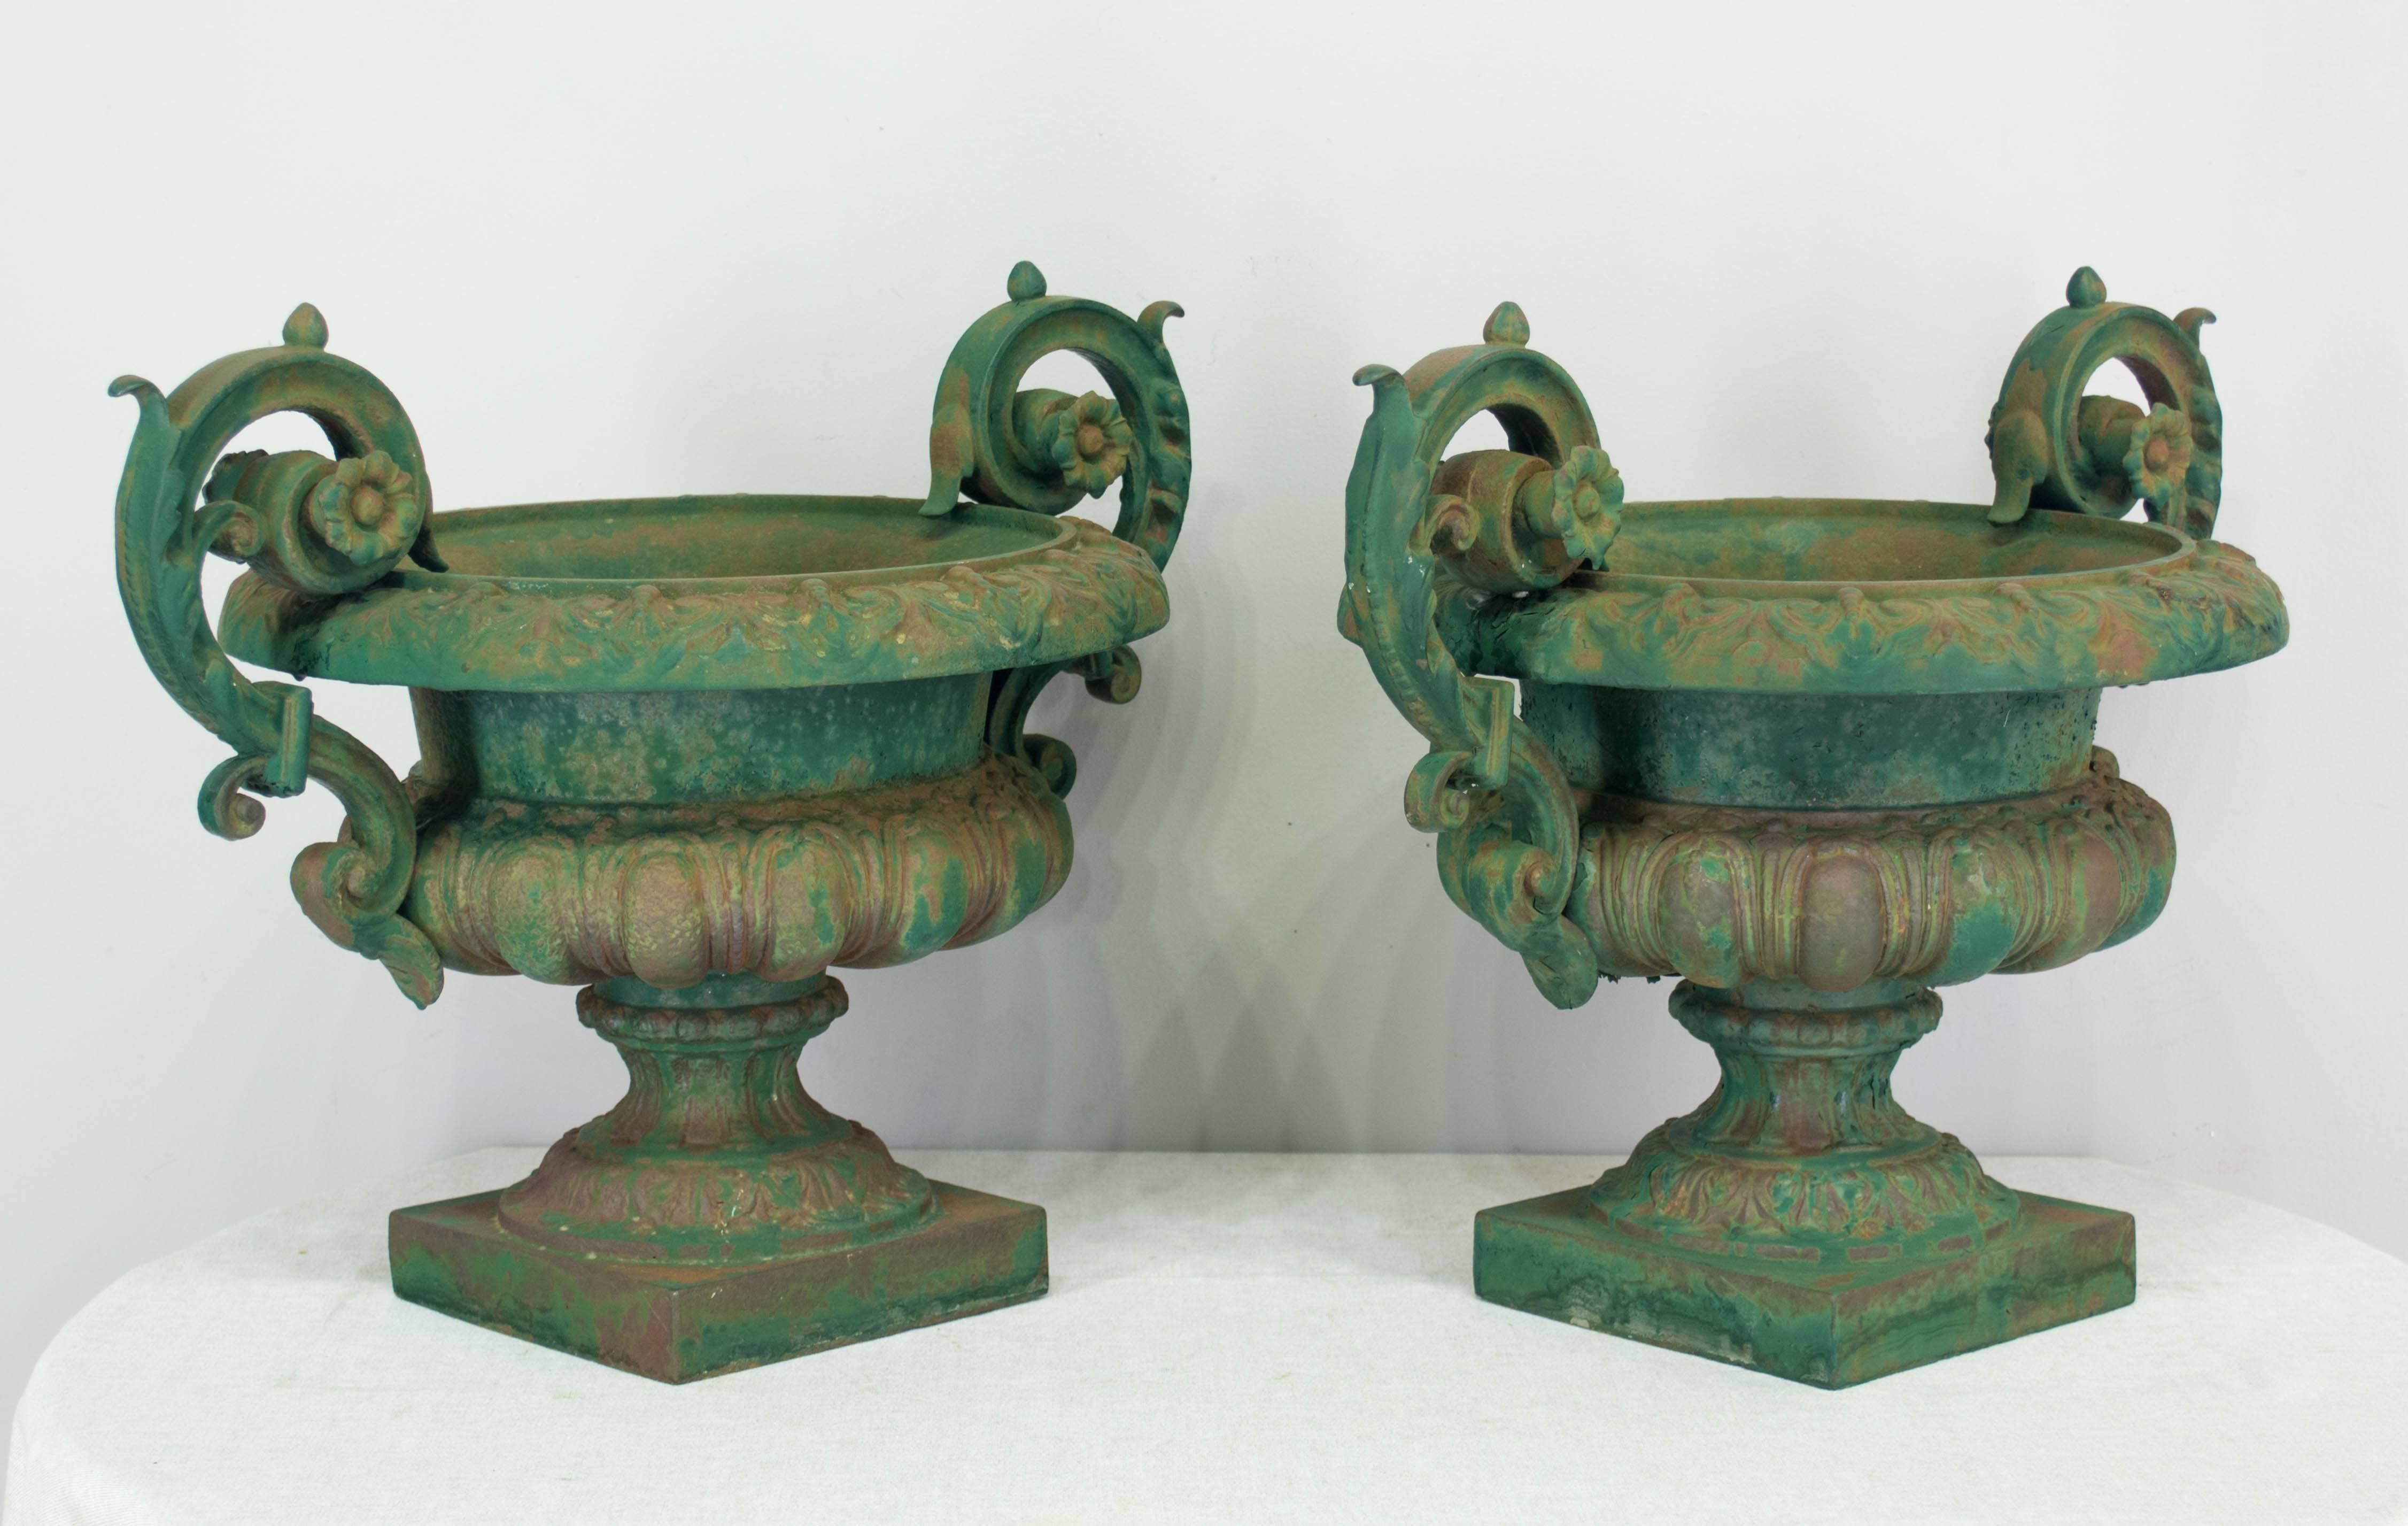 Pair of 19th century French cast iron urn planters, with original weathered green painted patina. Nicely cast details, especially on the double handles. Base: 7.25" square urns: 14.5" diameter. Weight: 42 lbs. each. 
More photos available